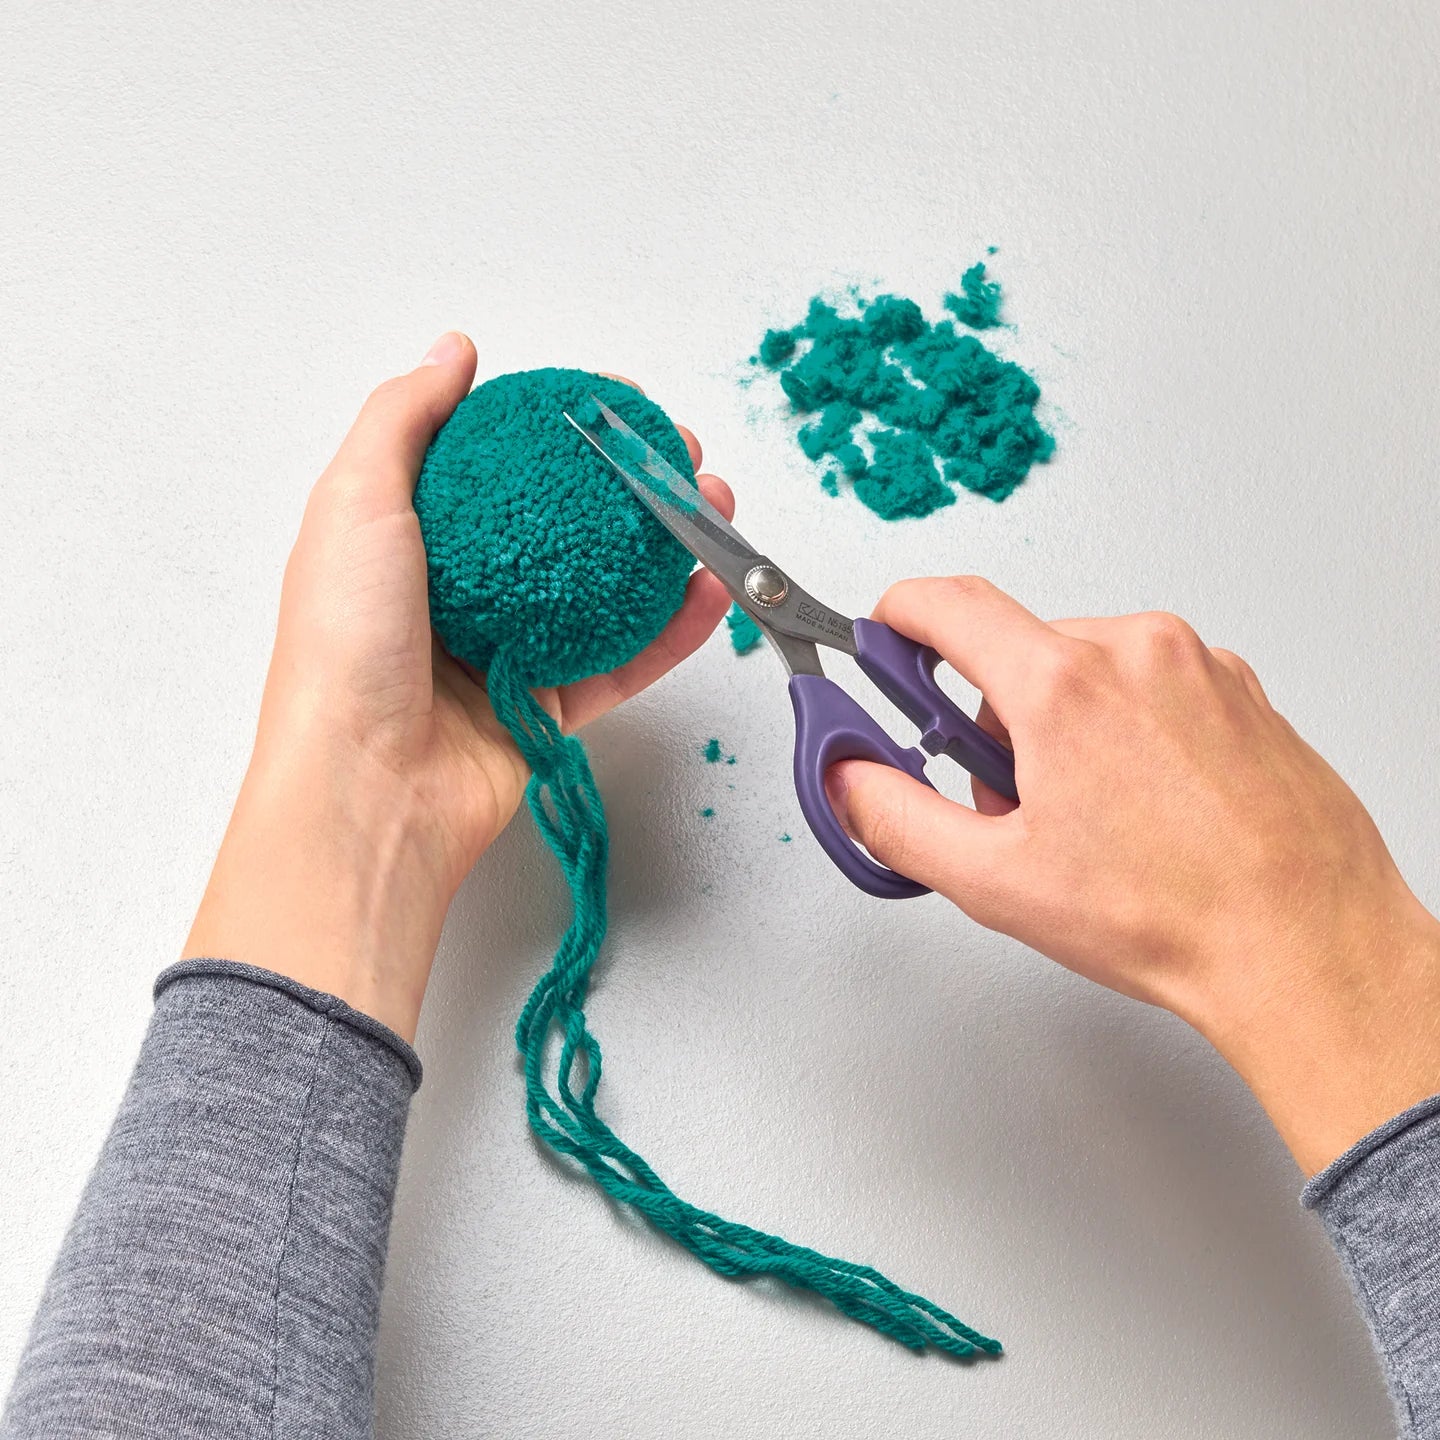 Prym 2-in-1 Pompom Maker Small for 1.5-Inch and 2-Inch Diameter Pompoms